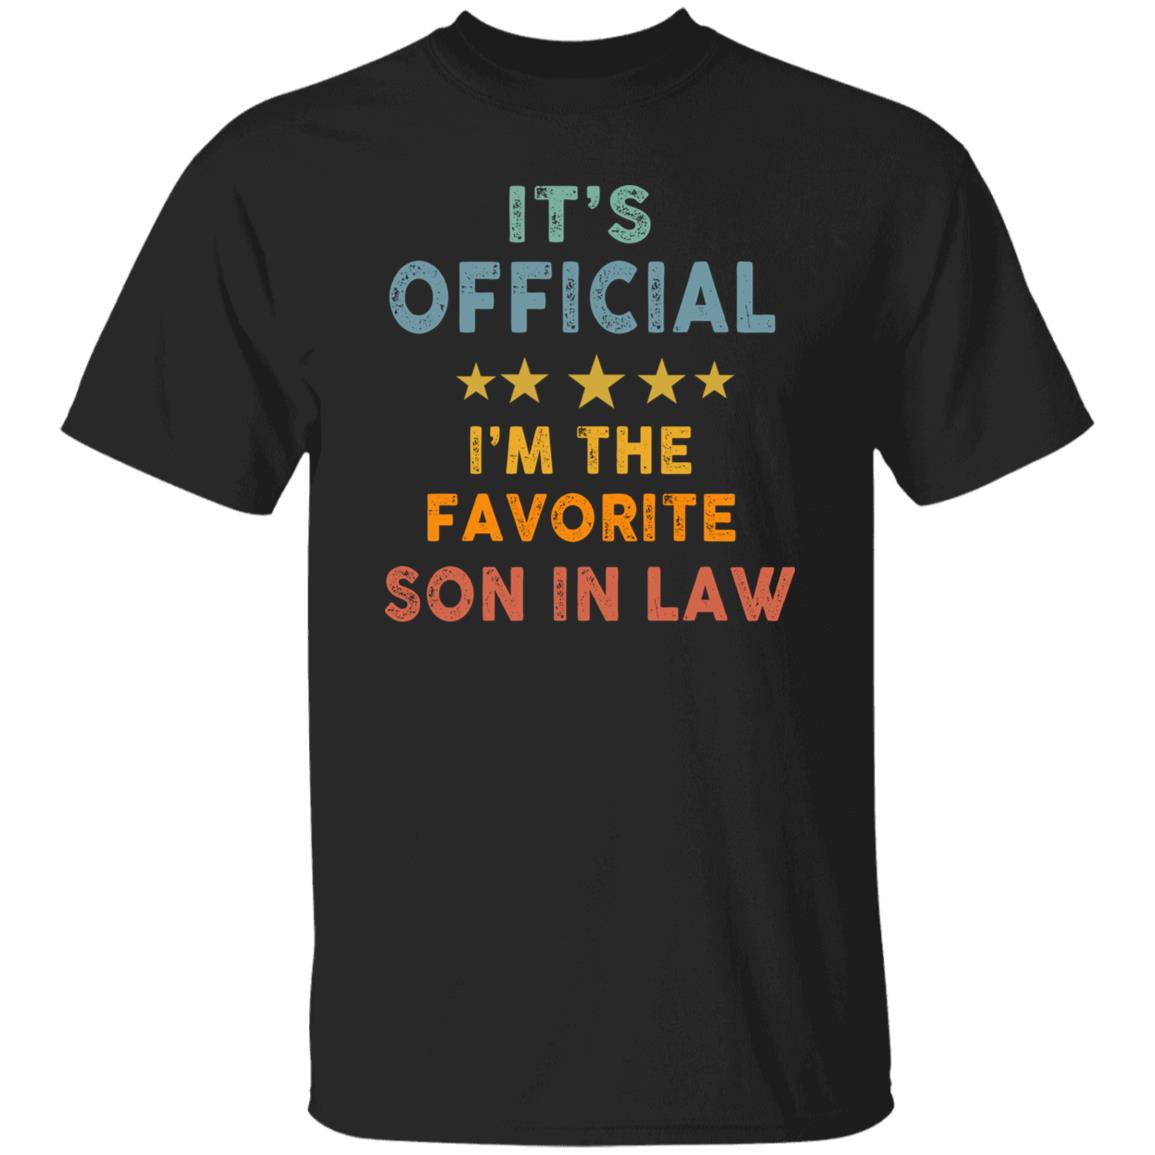 Official Favorite Son in Law Funny Gift Shirt